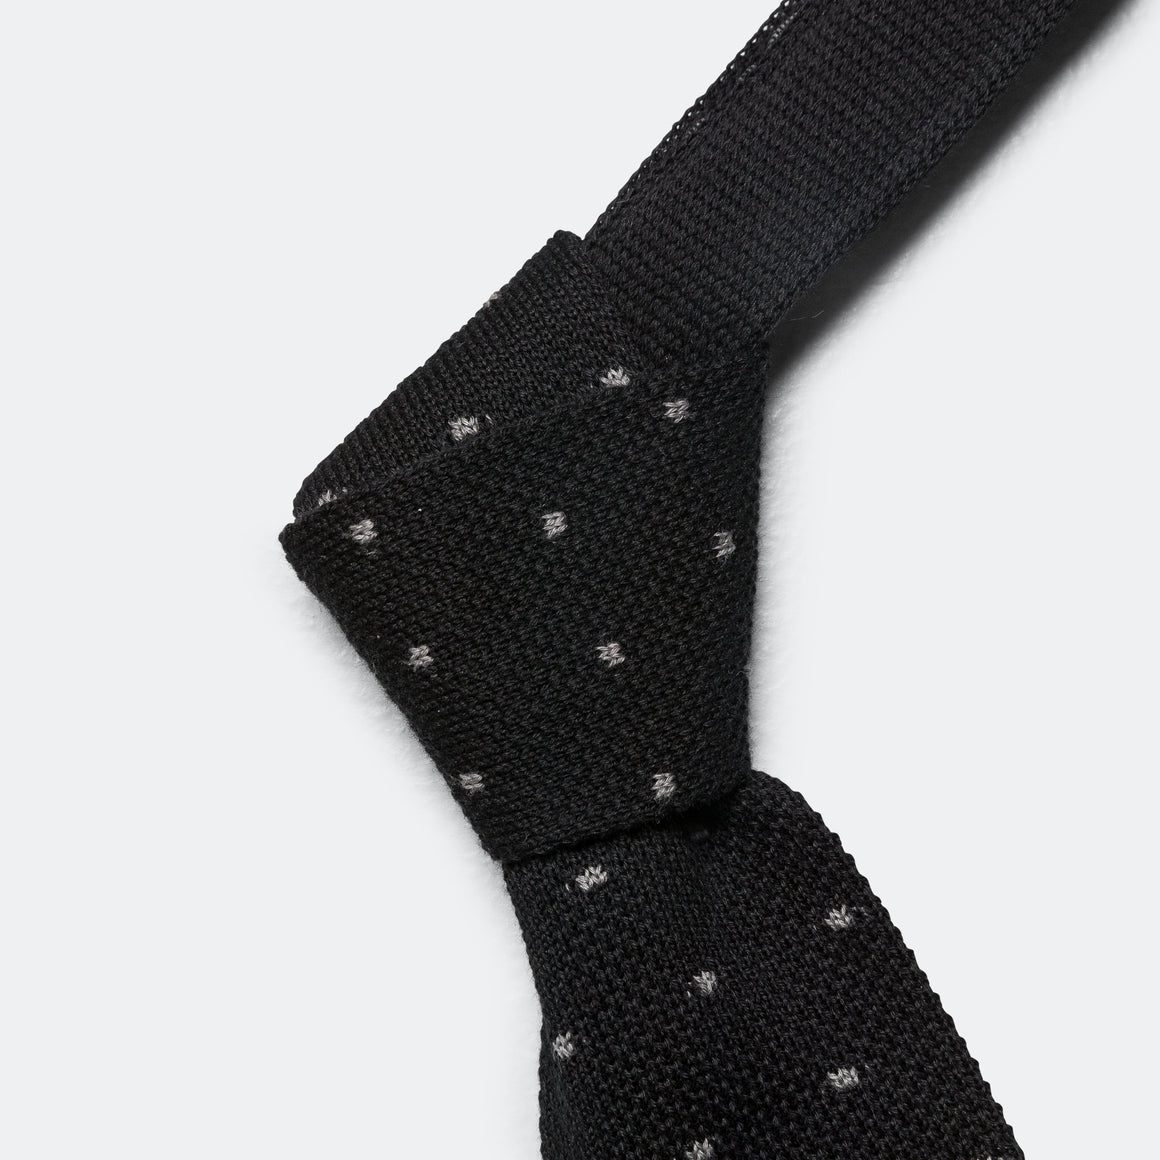 Engineered Garments - Knit Tie - Black Polka Dot - UP THERE